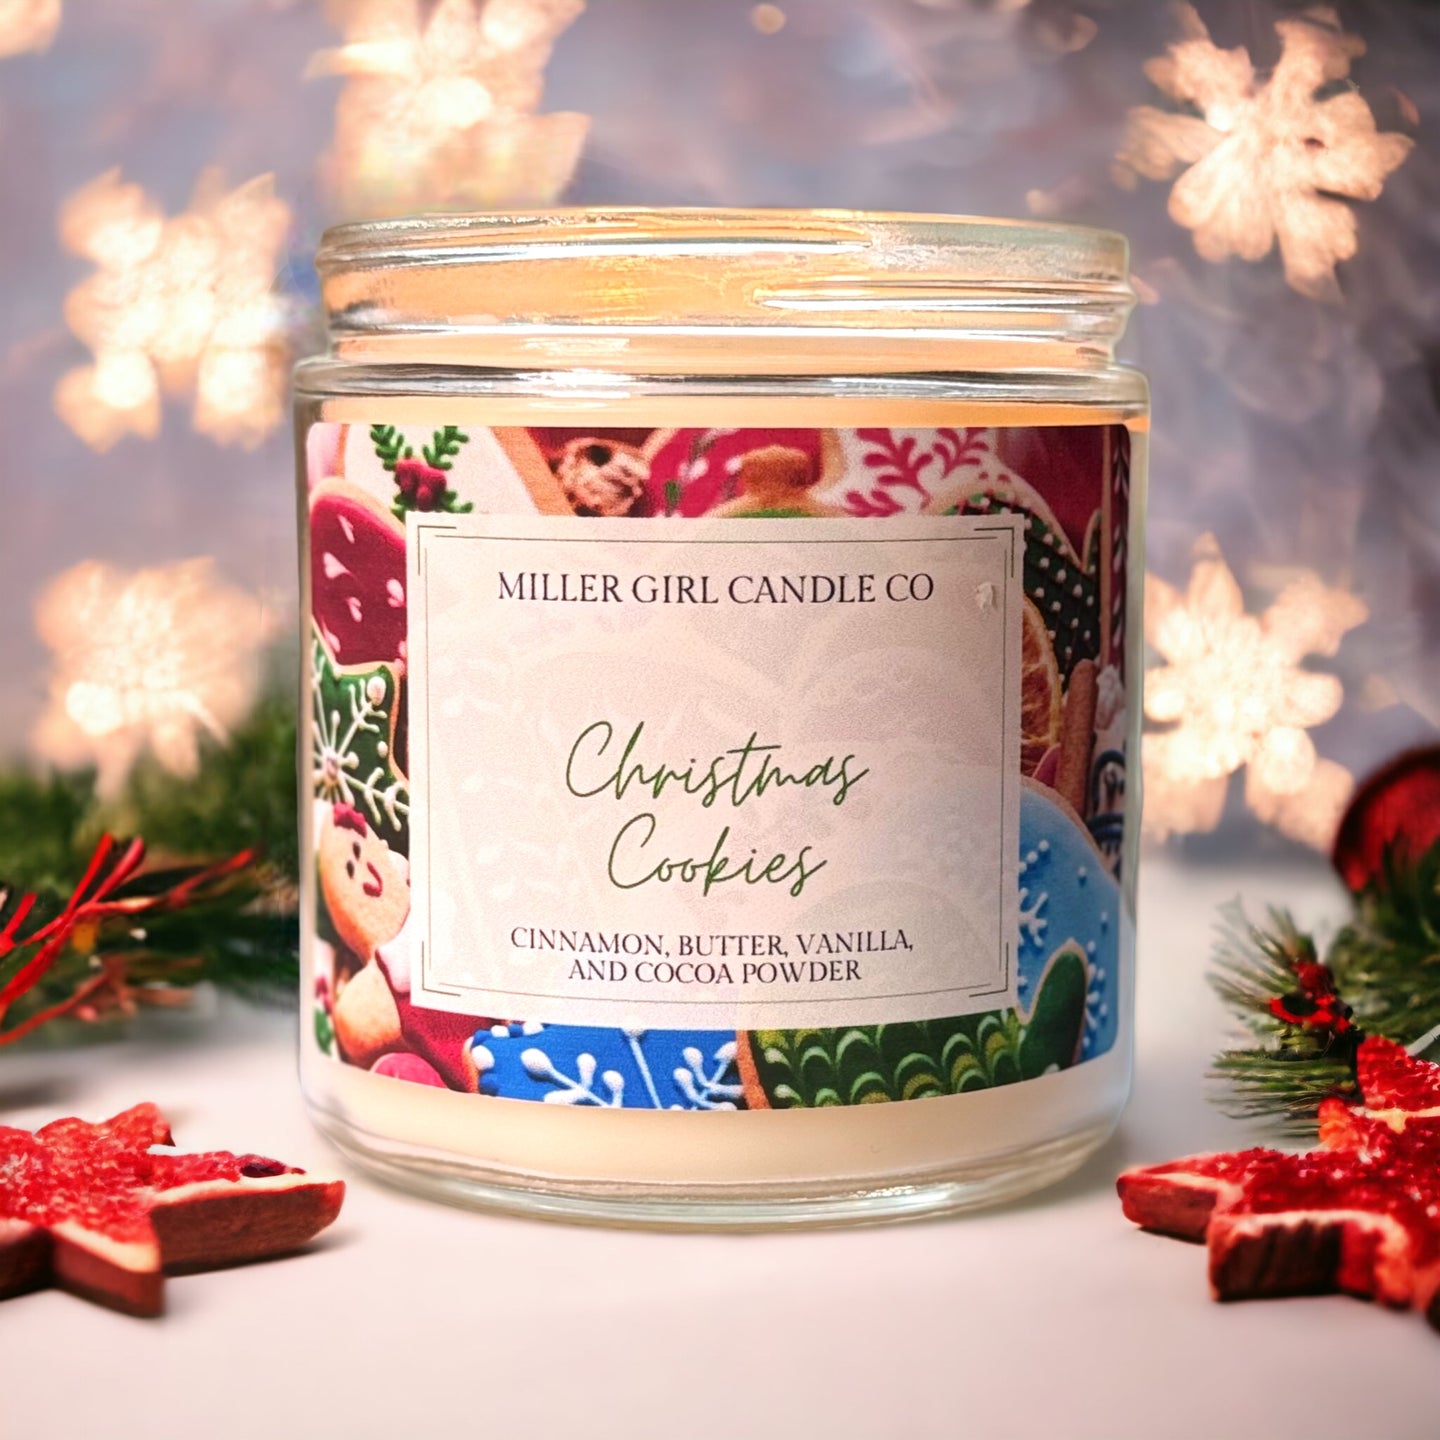 Christmas Cookies Candles & Wax Melts